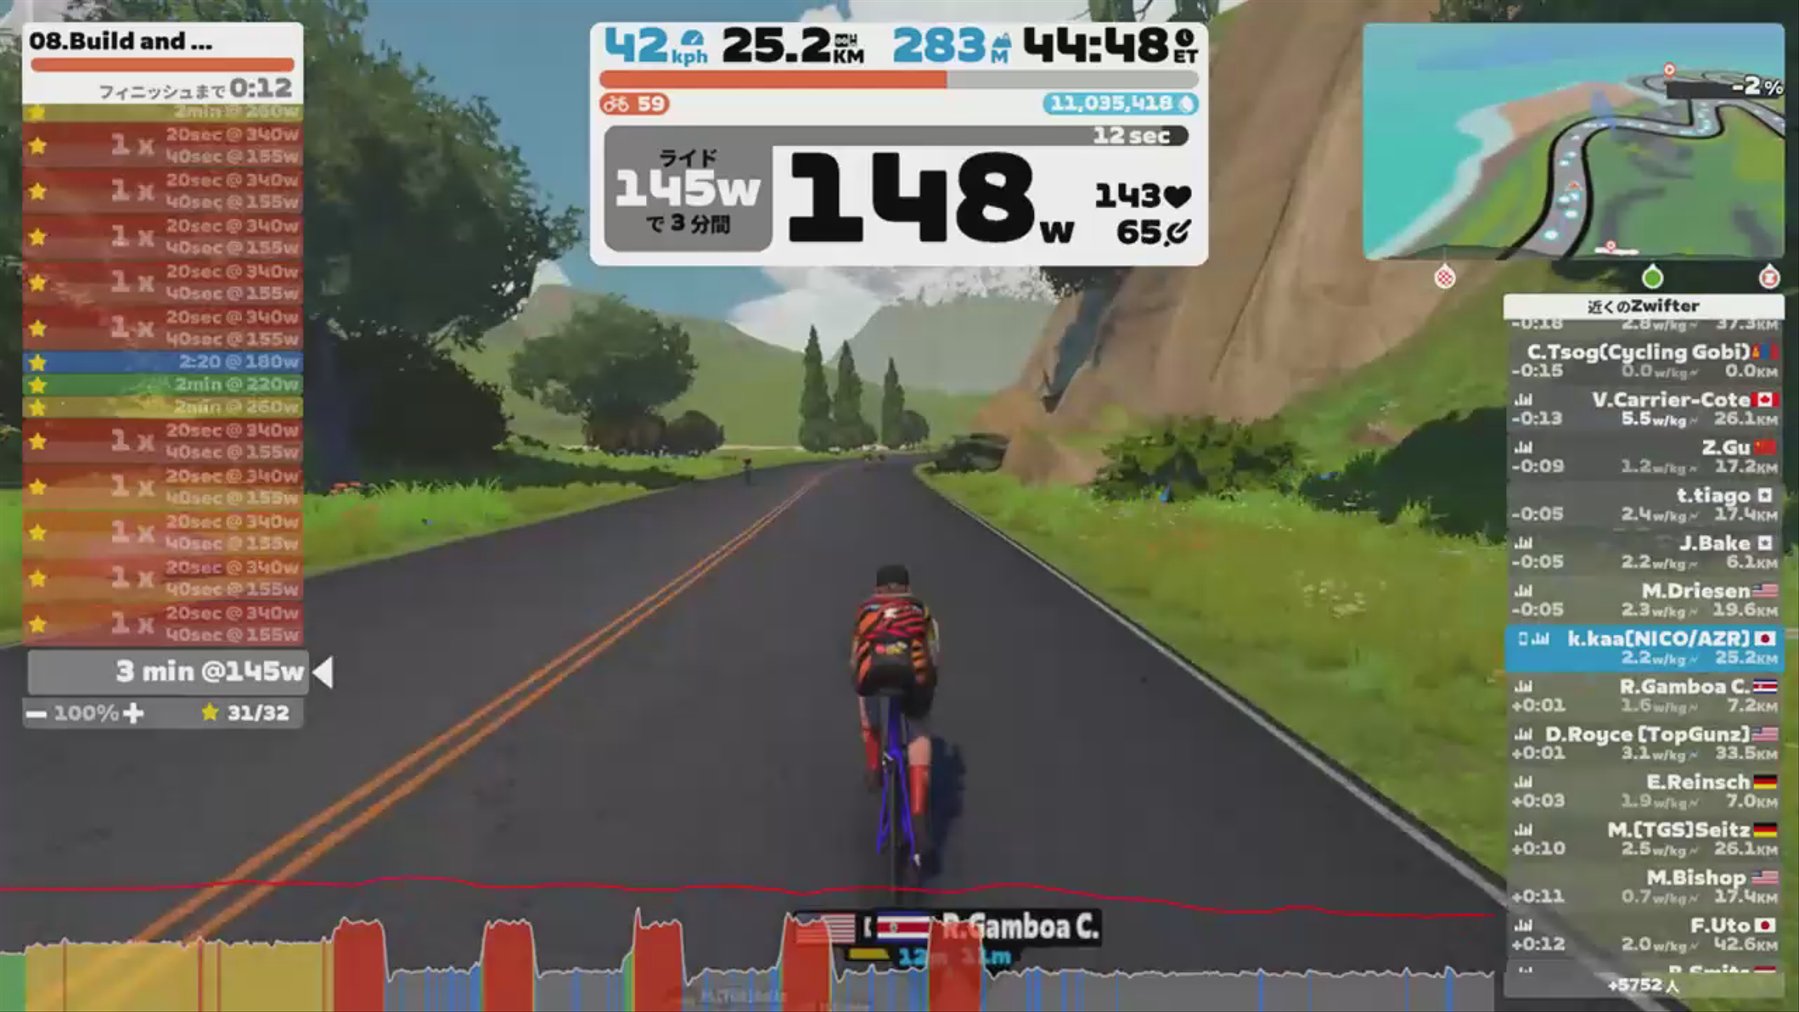 Zwift - 08. Build and Release on Countryside Tour in Watopia